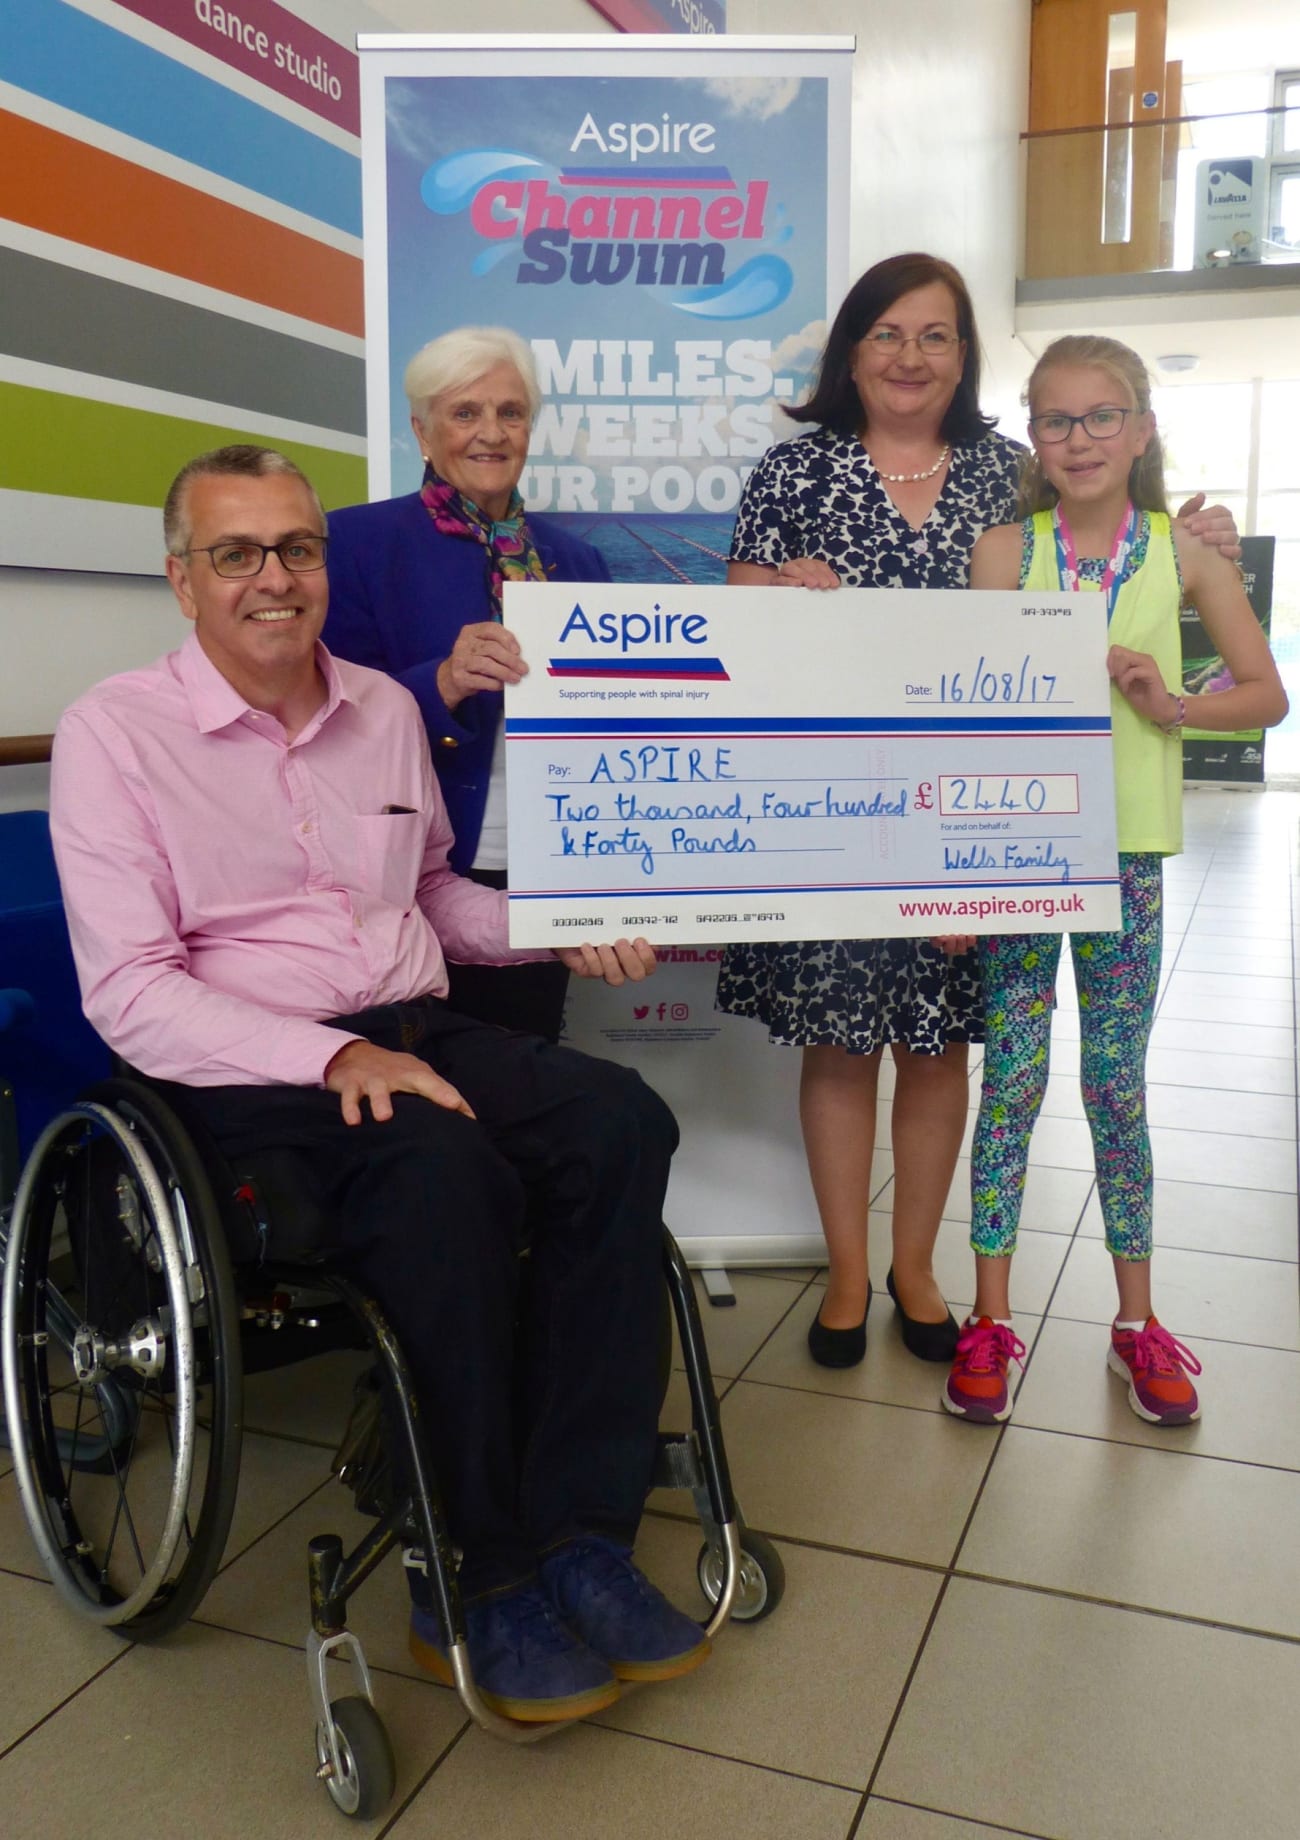 Peter, Valerie, Mary and Lily Wells present large cheque